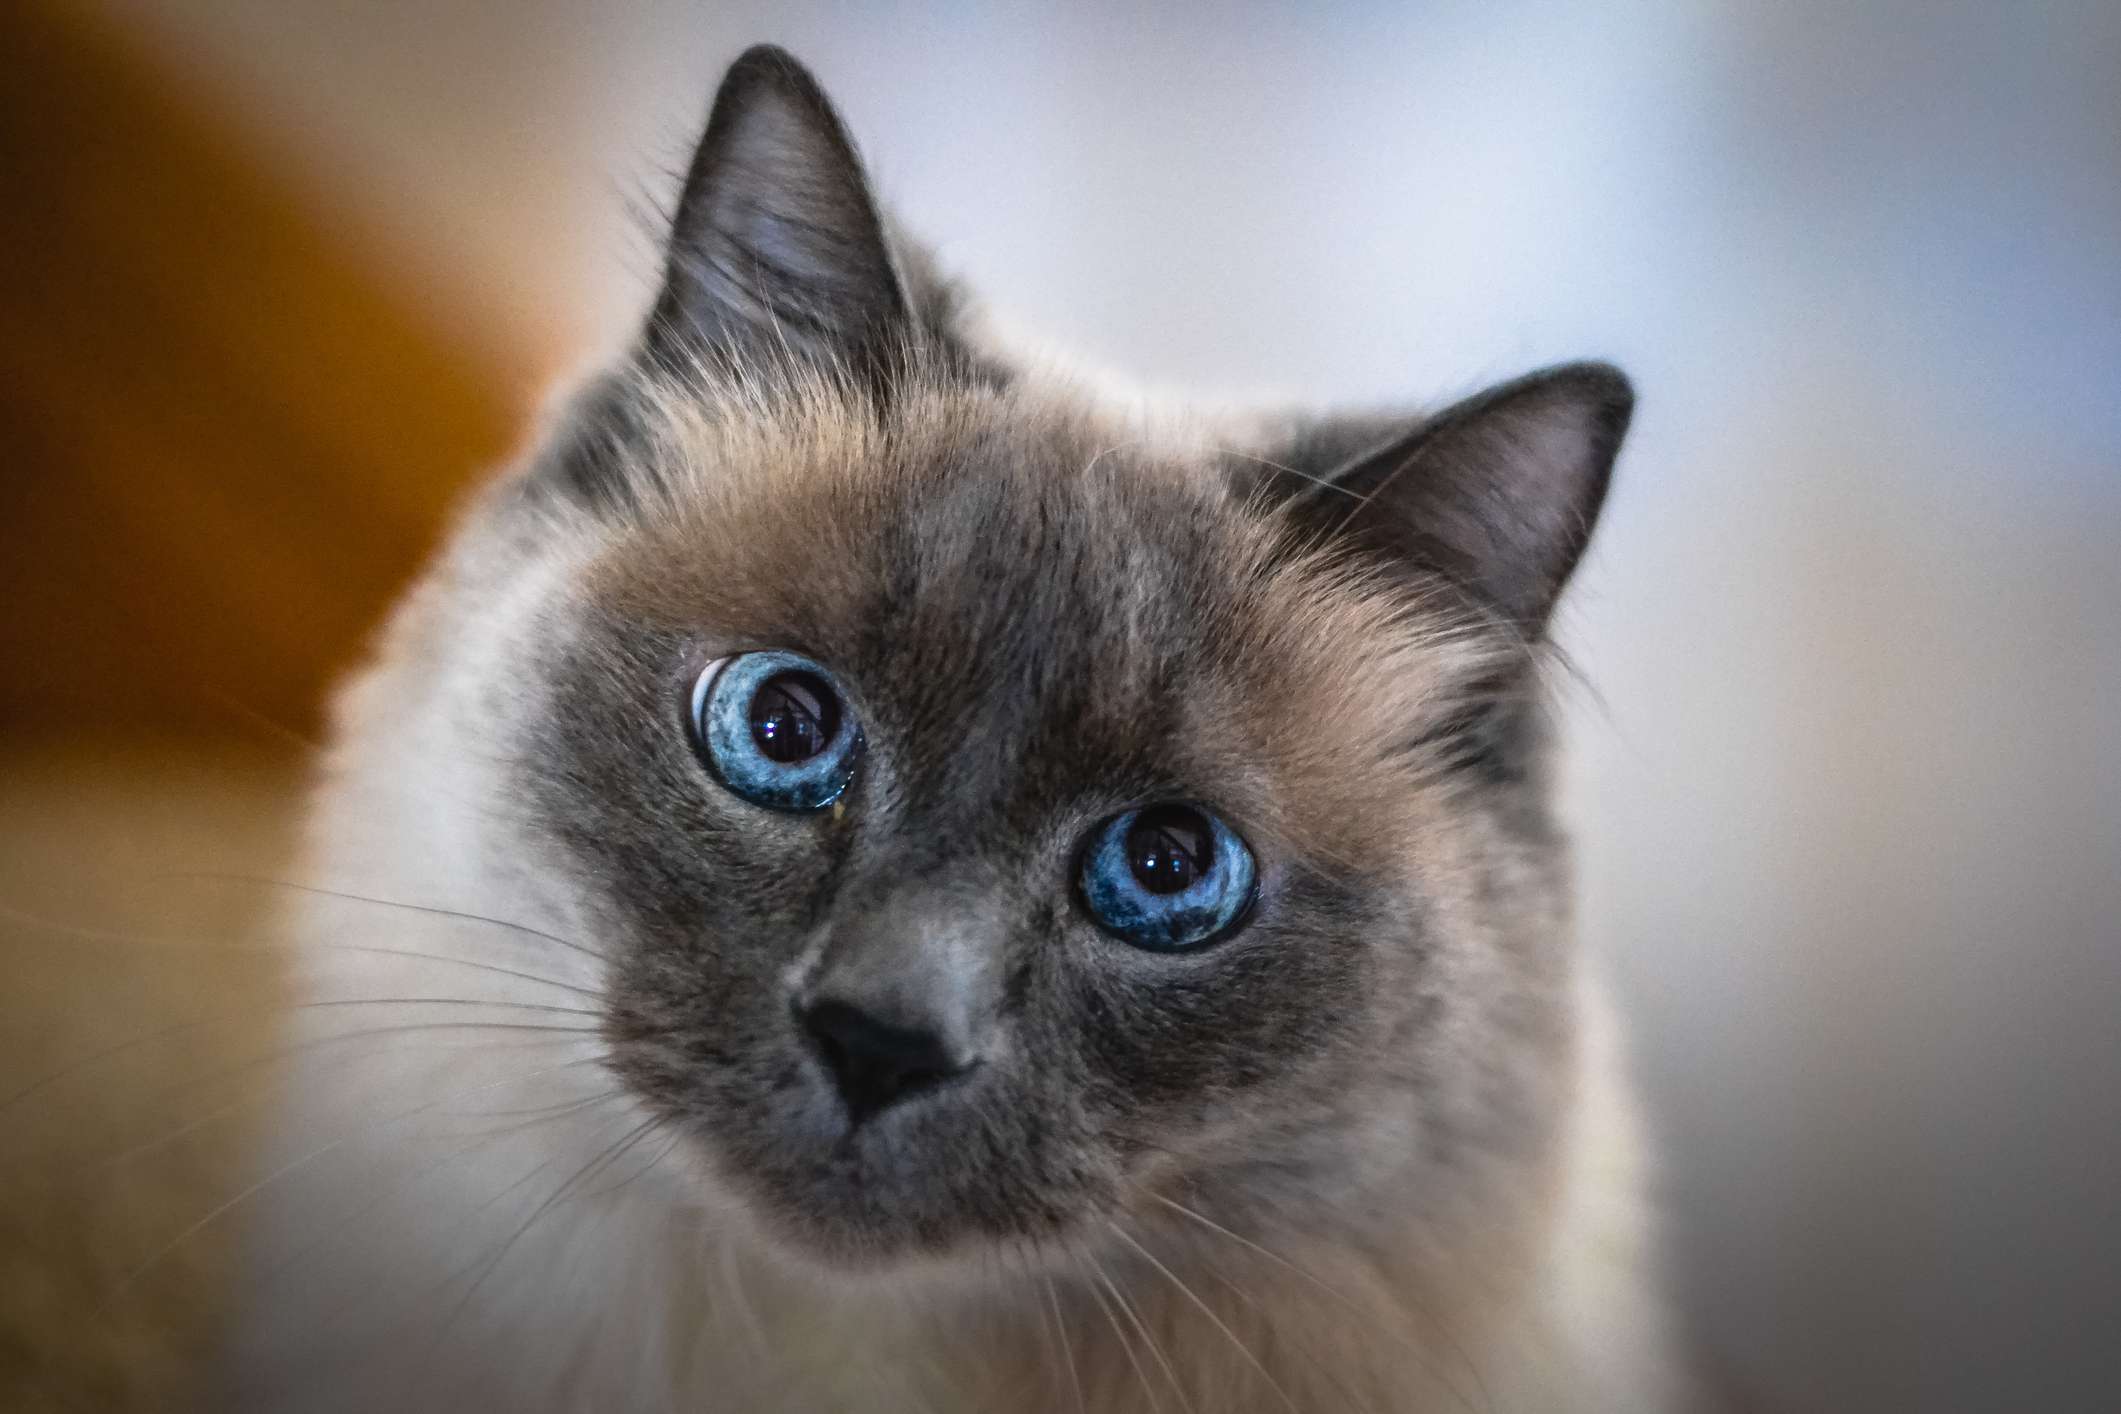 A Siamese cat looking into the camera.